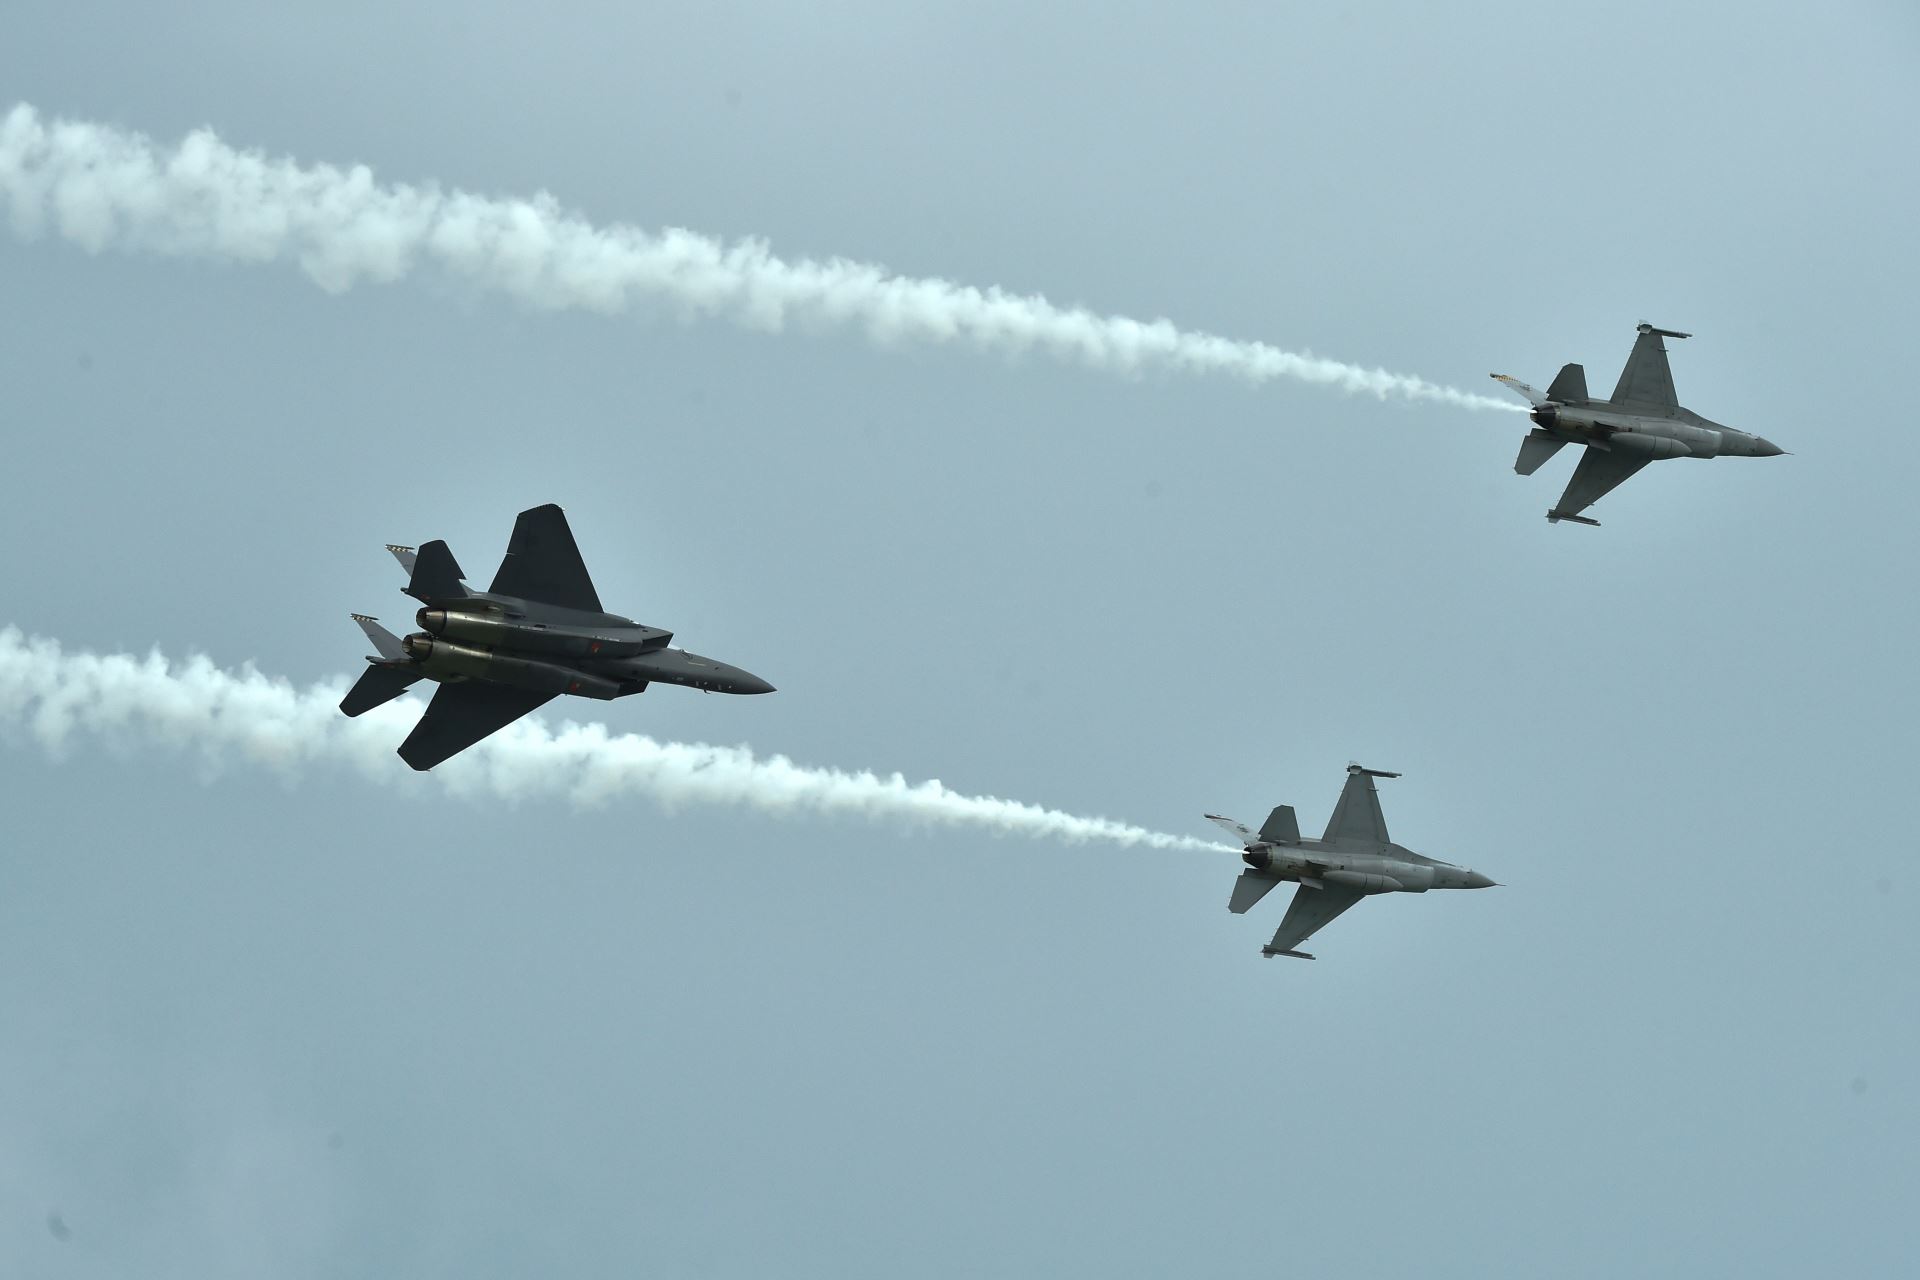 The F-15SG and F-16C fighter aircraft performing the ''3-Ship Barrel Roll'' as part of the RSAF's aerial display at SA18.